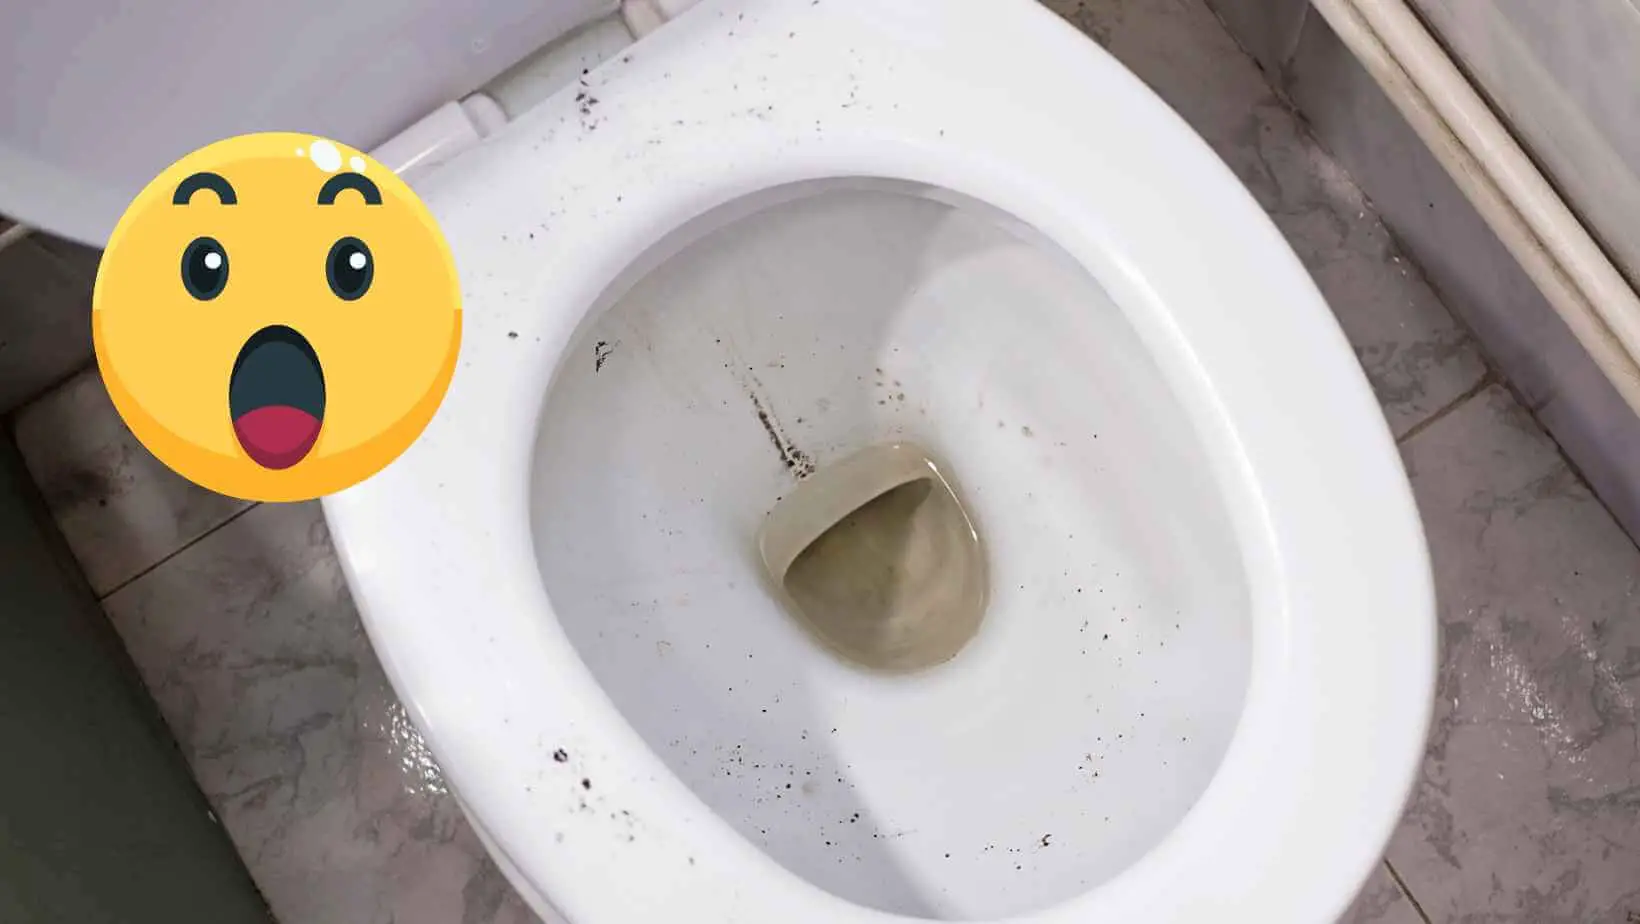 Black Stuff in Toilet After Flushing